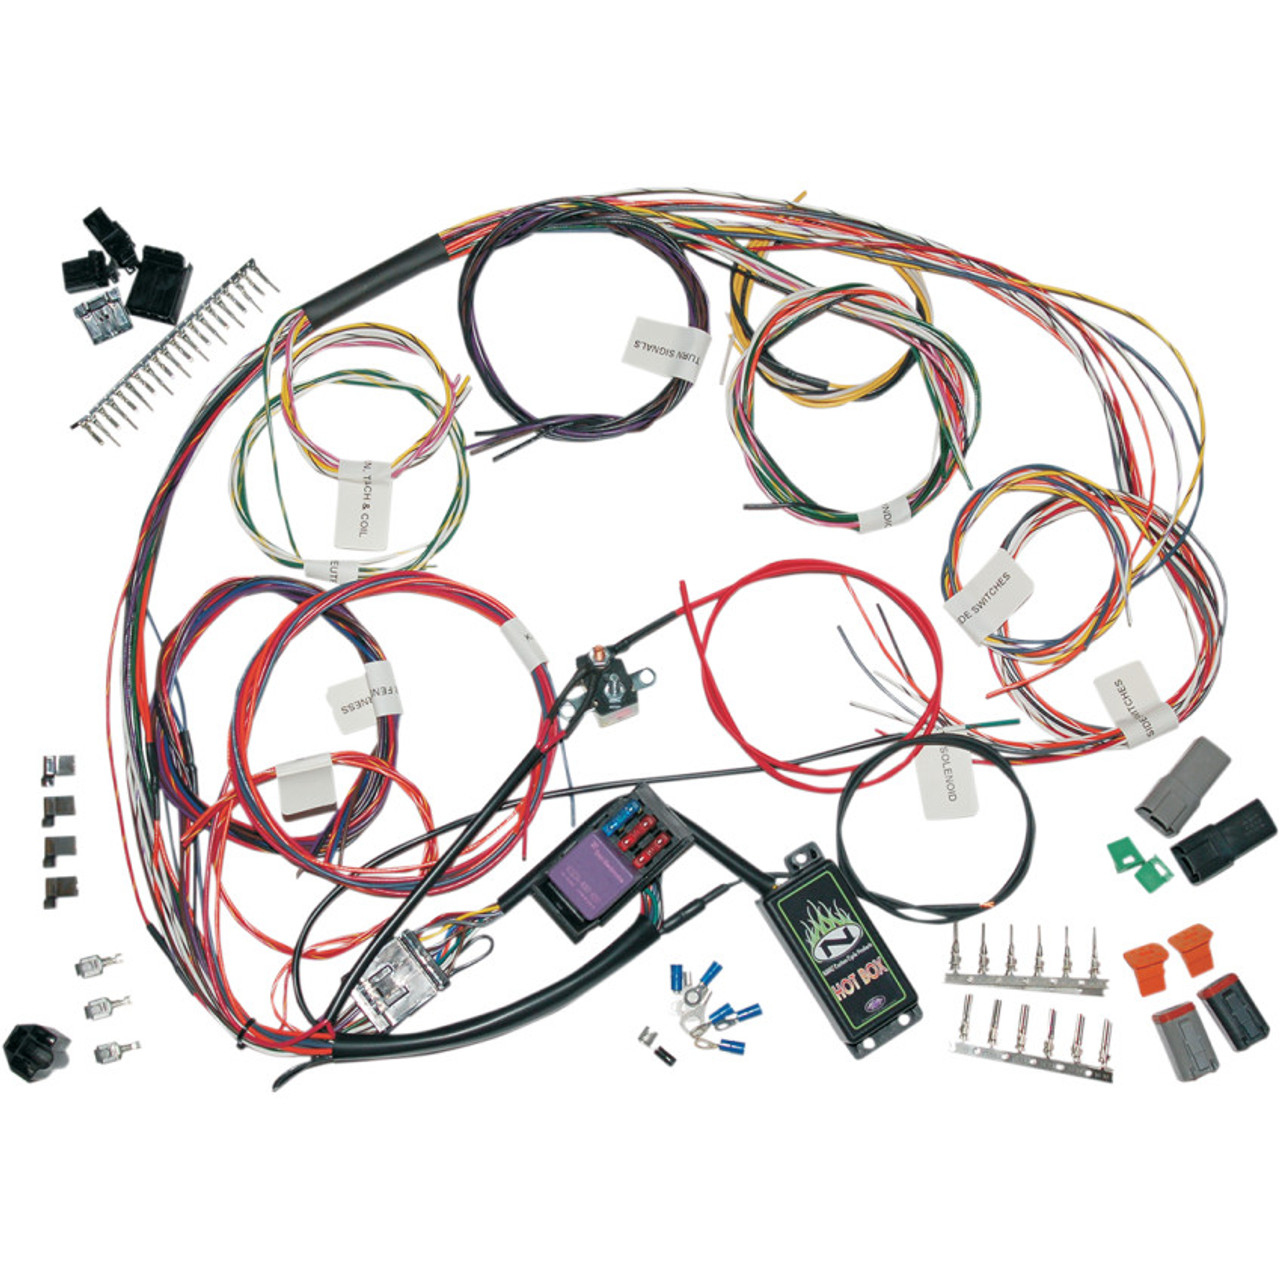 39 Wiring Harness For A - Wiring Diagram Online Source